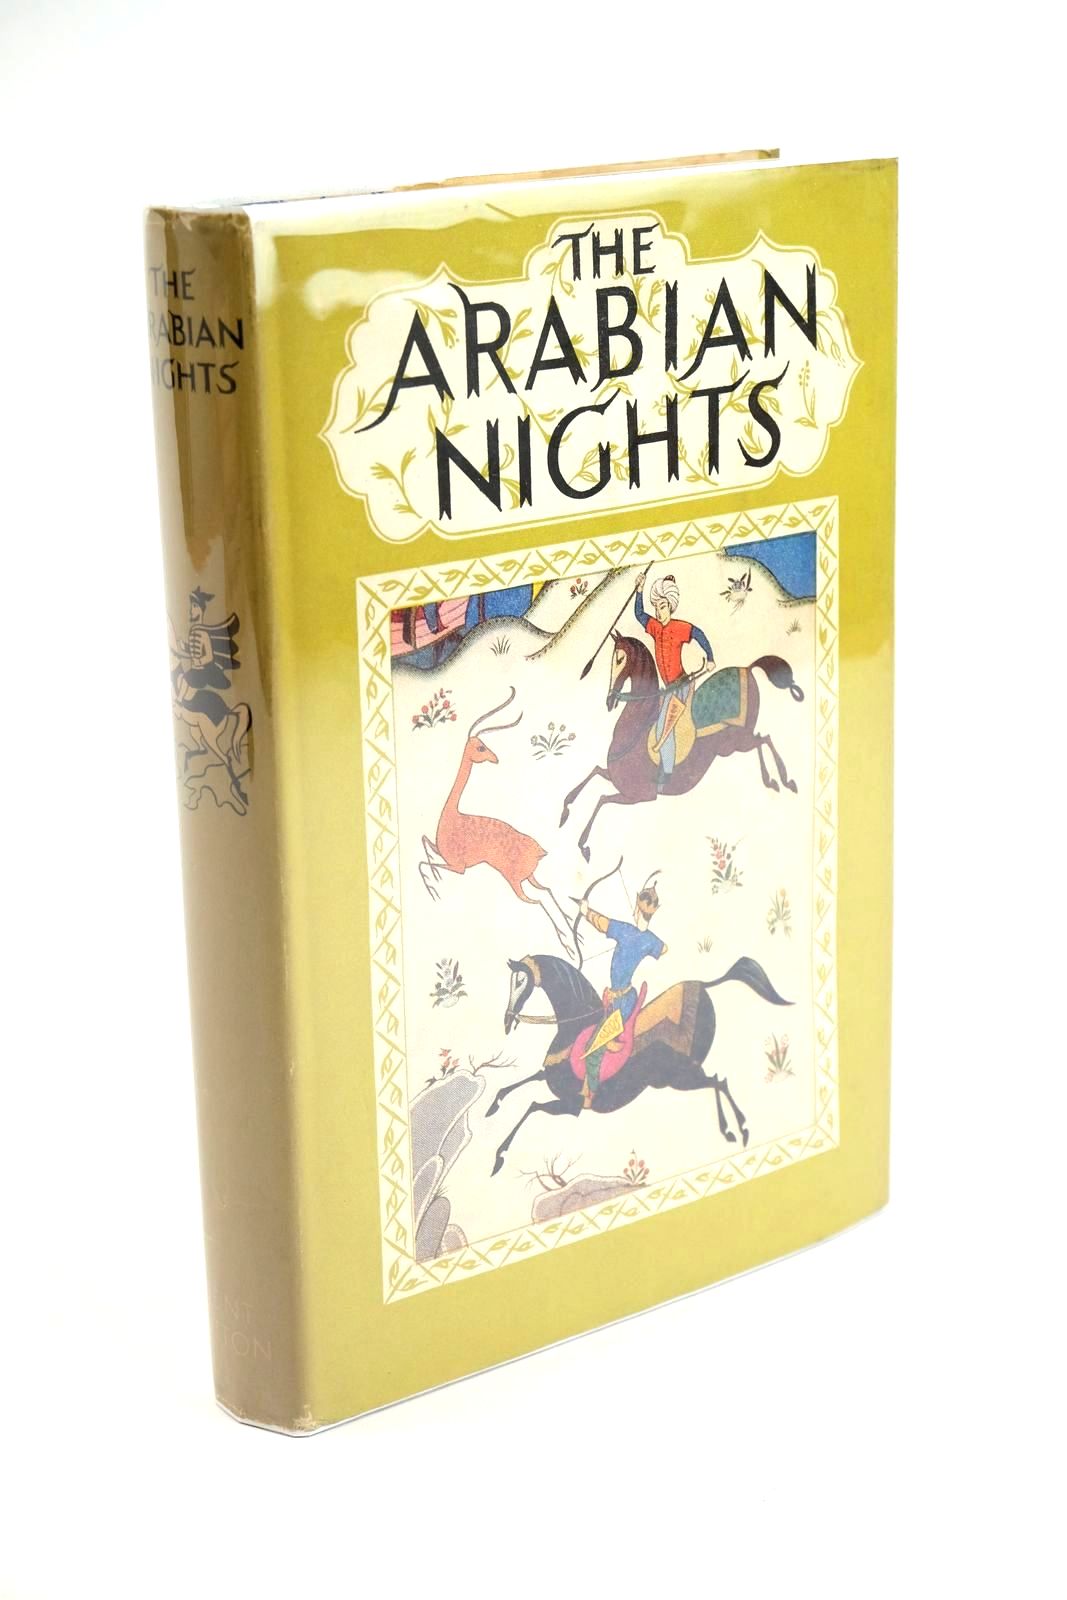 Photo of FAIRY TALES FROM THE ARABIAN NIGHTS written by Dixon, E. illustrated by Kiddell-Monroe, Joan published by J.M. Dent & Sons Ltd. (STOCK CODE: 1323545)  for sale by Stella & Rose's Books